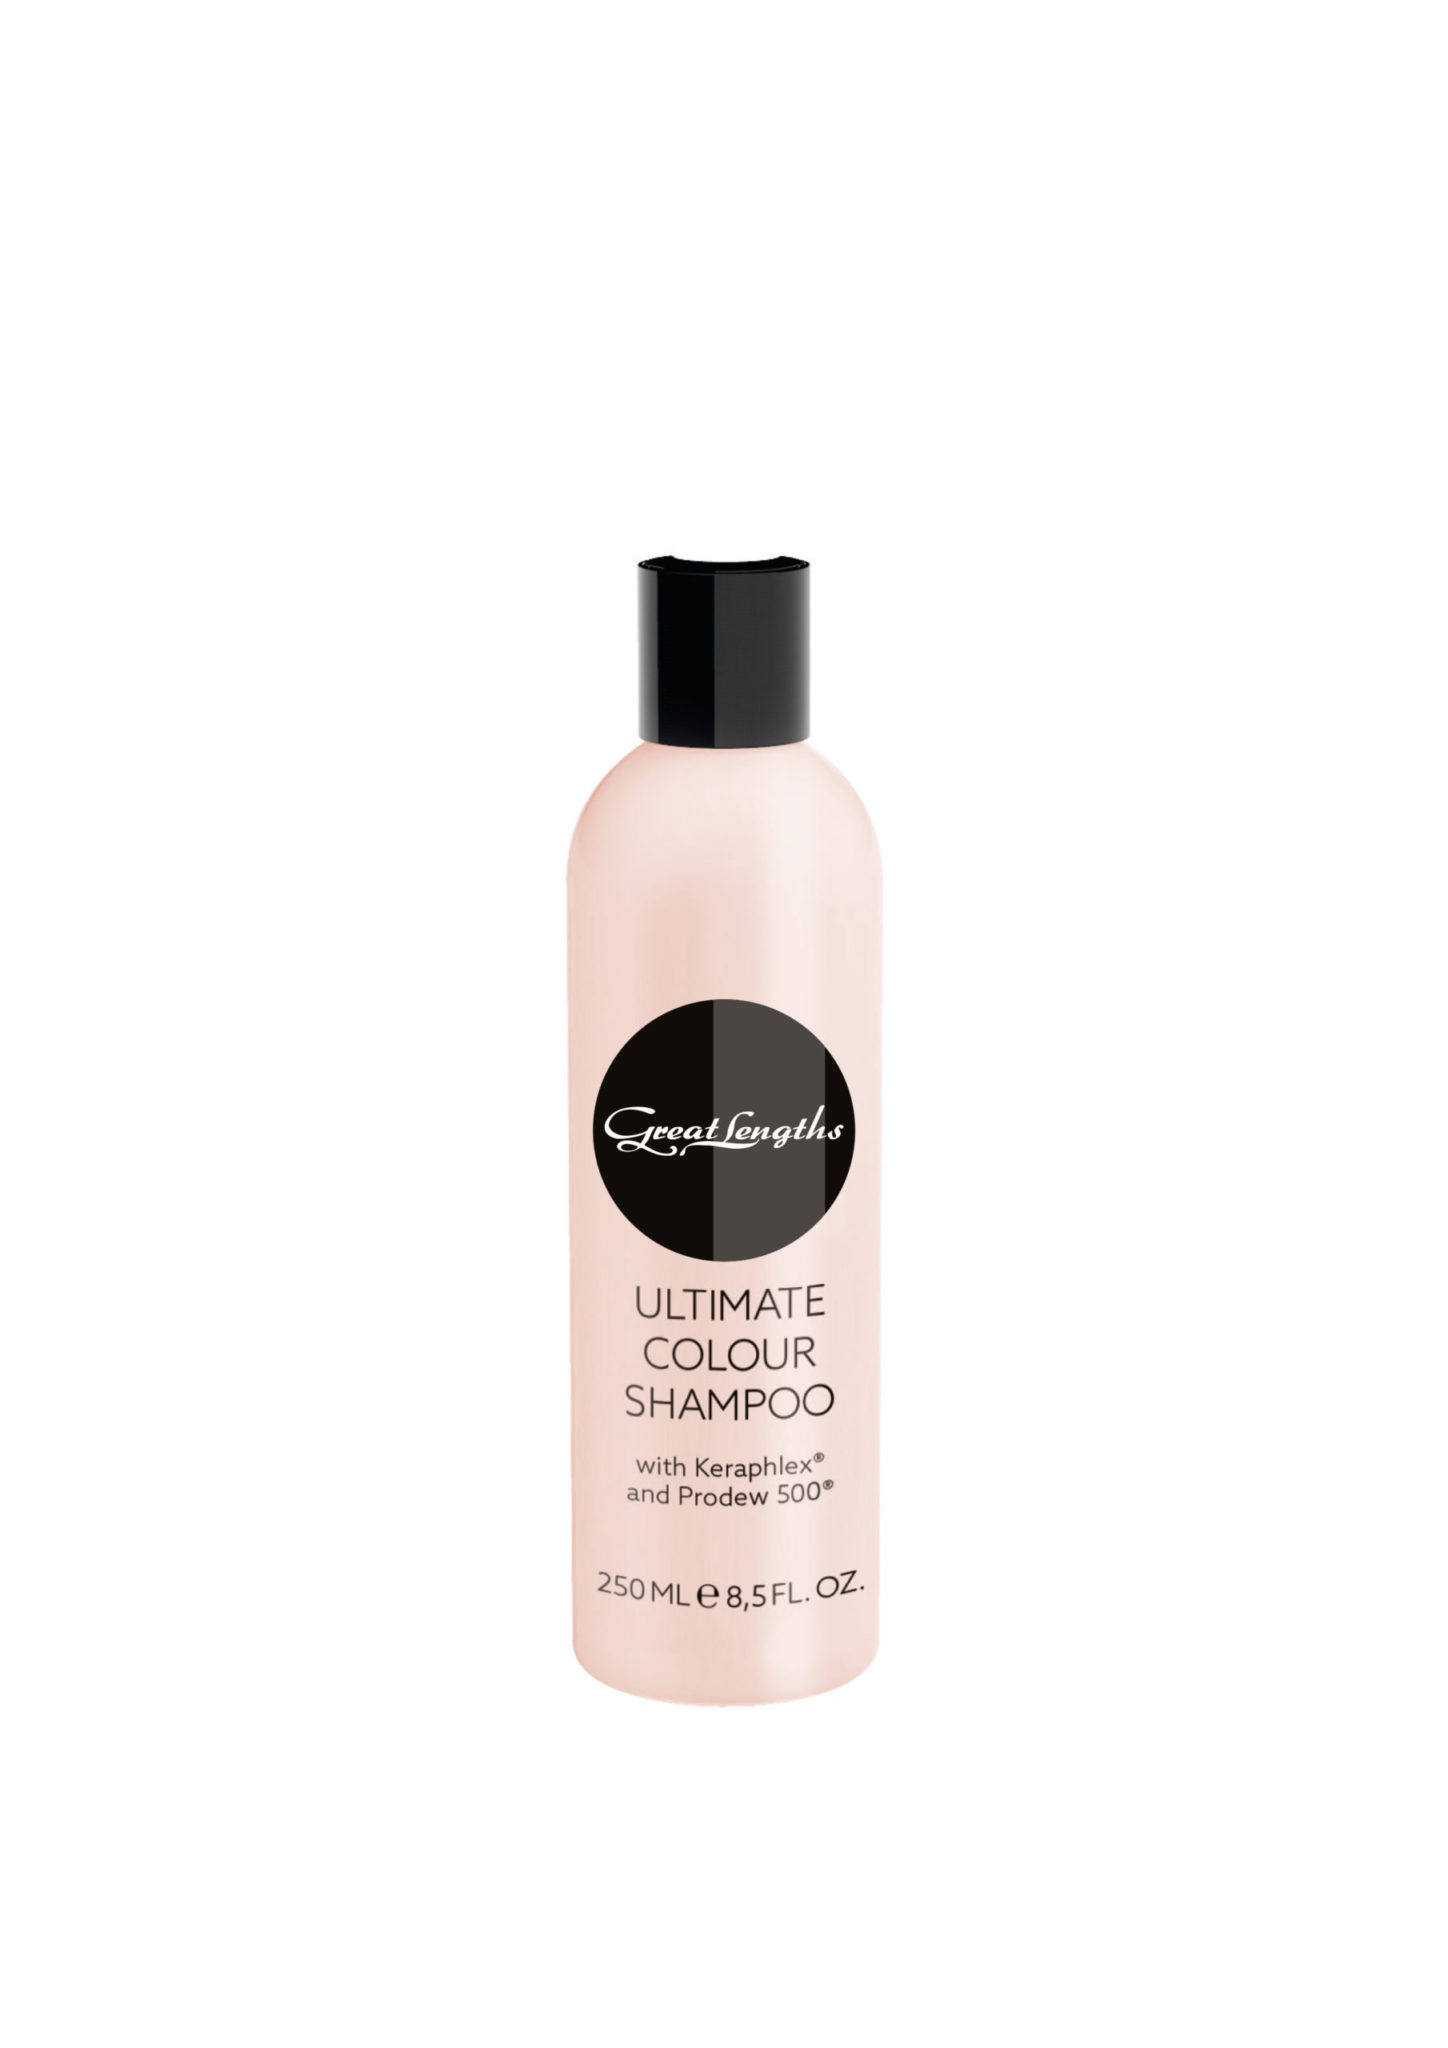 Great Lengths Ultimate Colour Shampoo